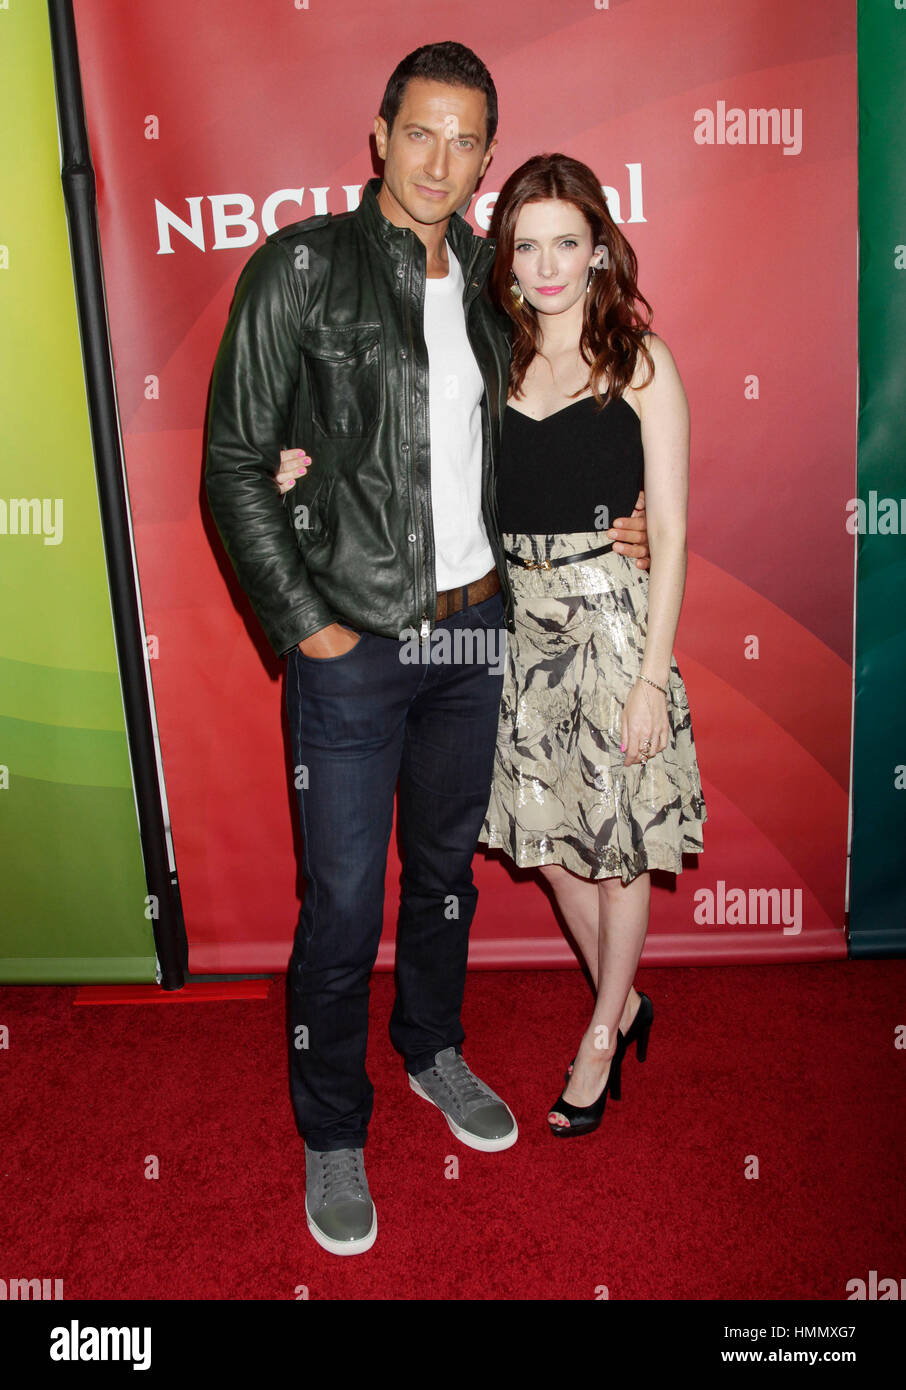 Sasha Roiz and Bitsie Tulloch arrive at the NBCUniversal TCA Press Tour on  January 6, 2013, in Pasadena, California. Photo by Francis Specker Stock  Photo - Alamy